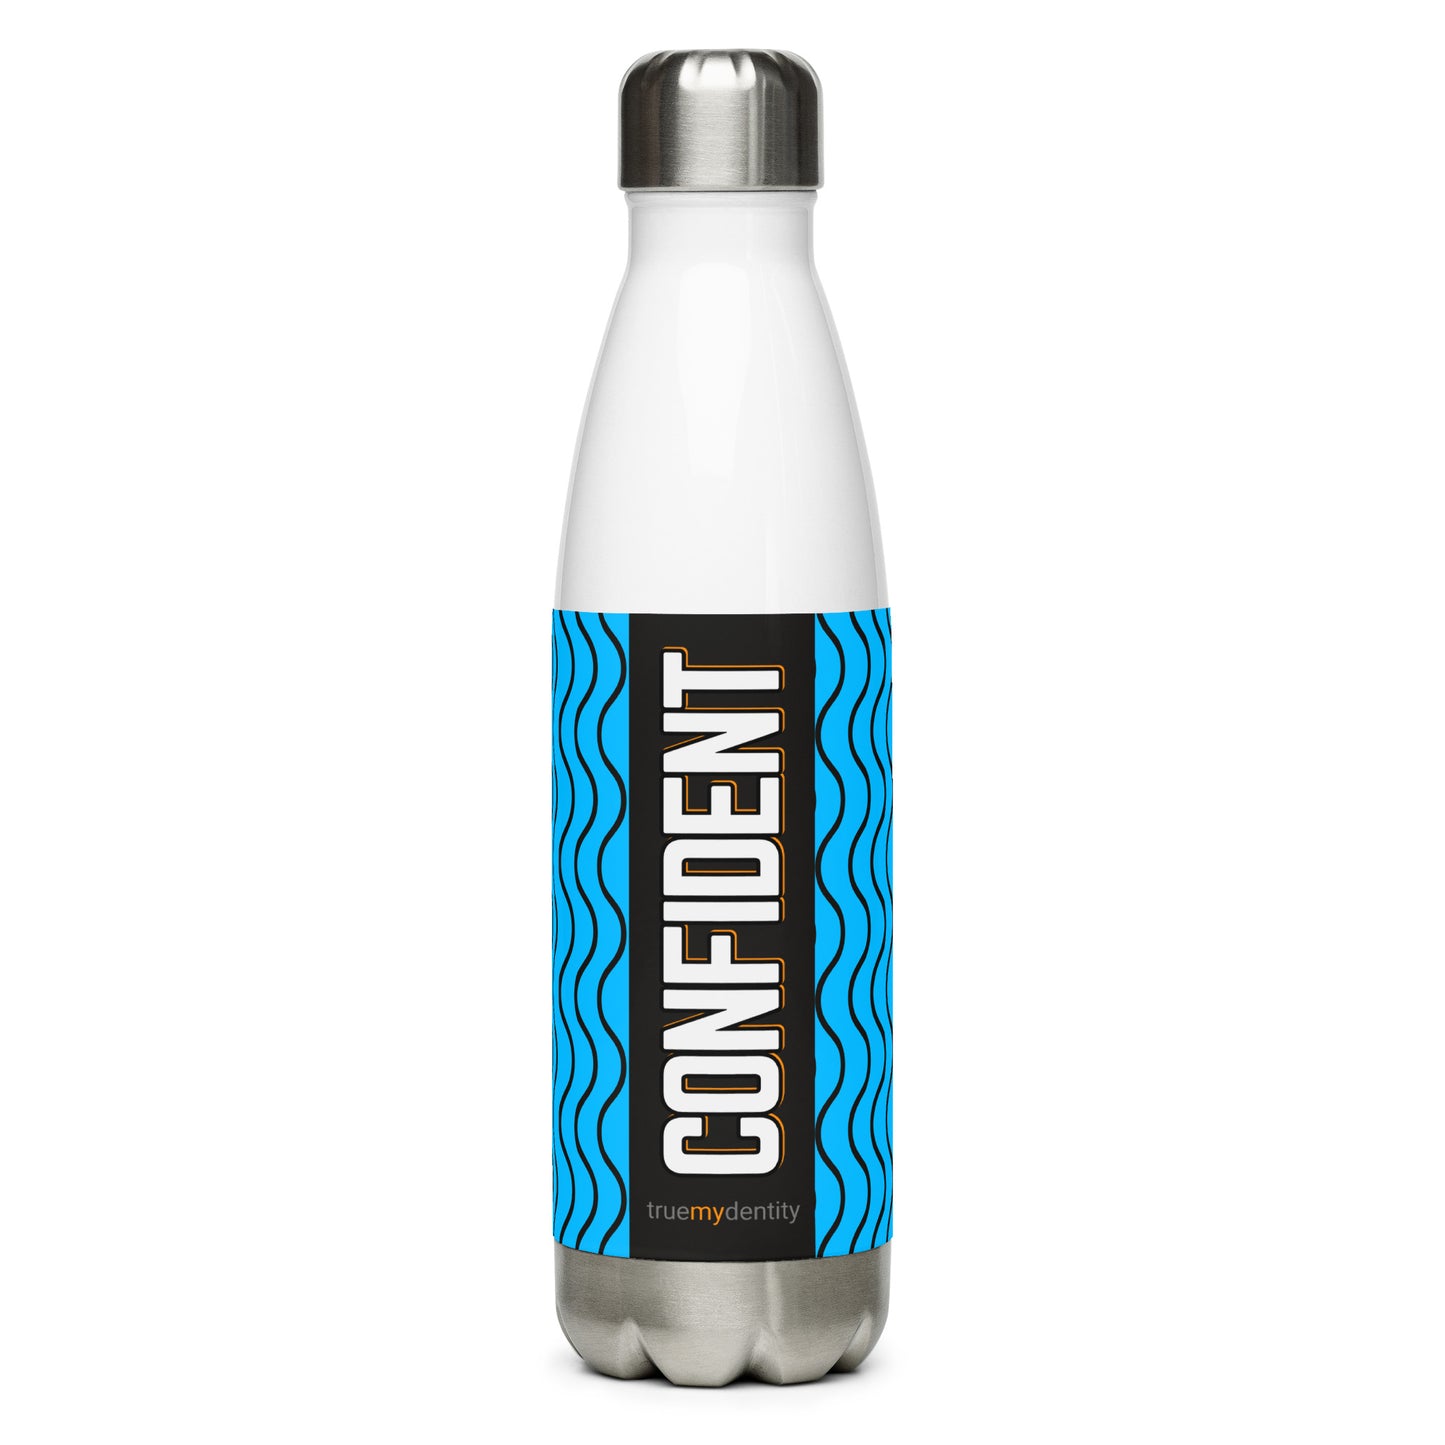 CONFIDENT Stainless Steel Water Bottle Blue Wave Design, 17 oz, in Black or White